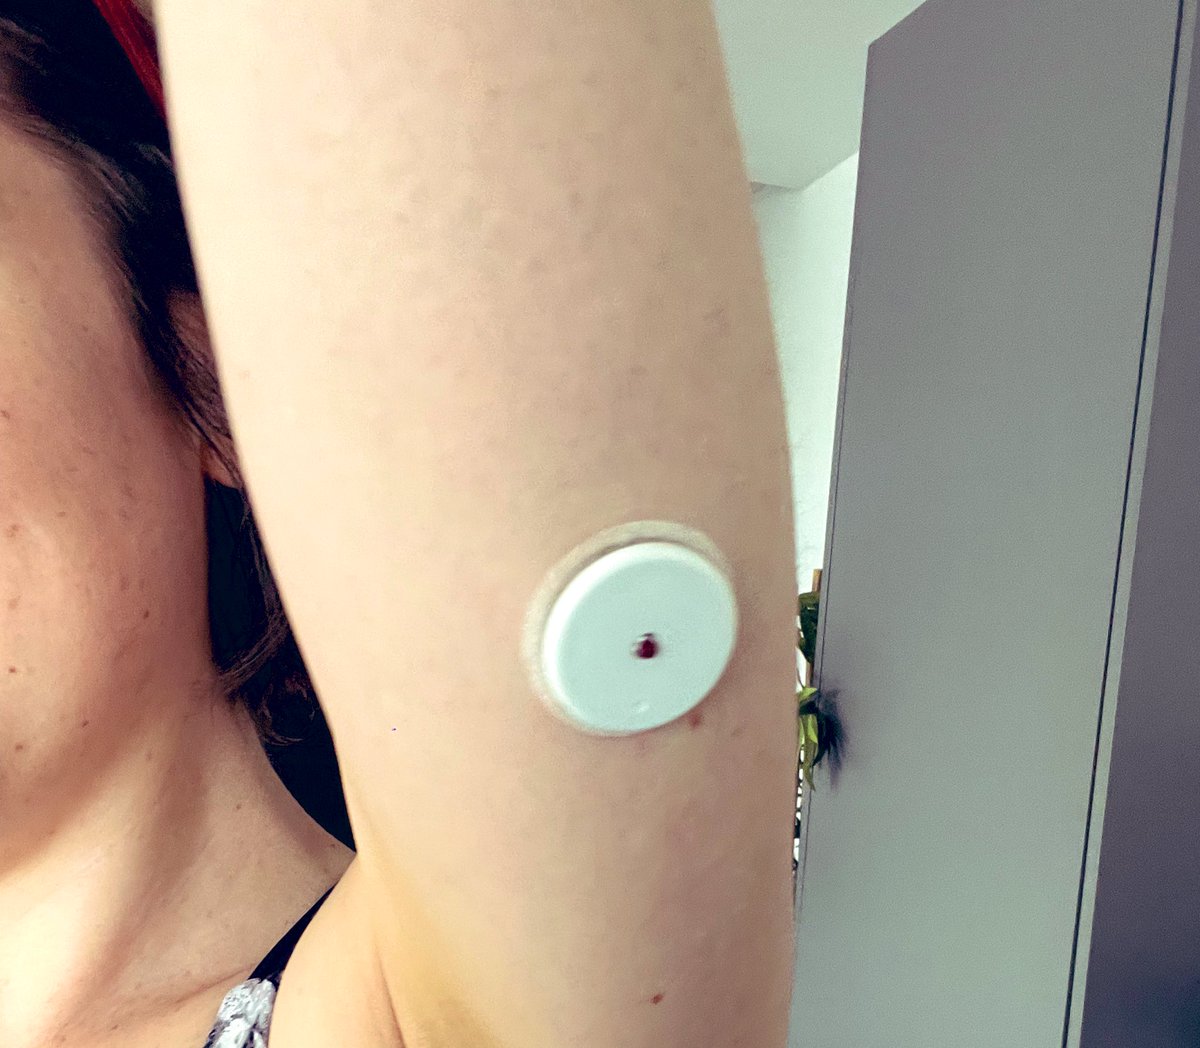 Popping the libre arm cherry. Next 14 days are all about avoiding doorframes and agressive toweling & jacket dressing. Any tips welcome…. 💙 #libre #diabetestech #gbdoc